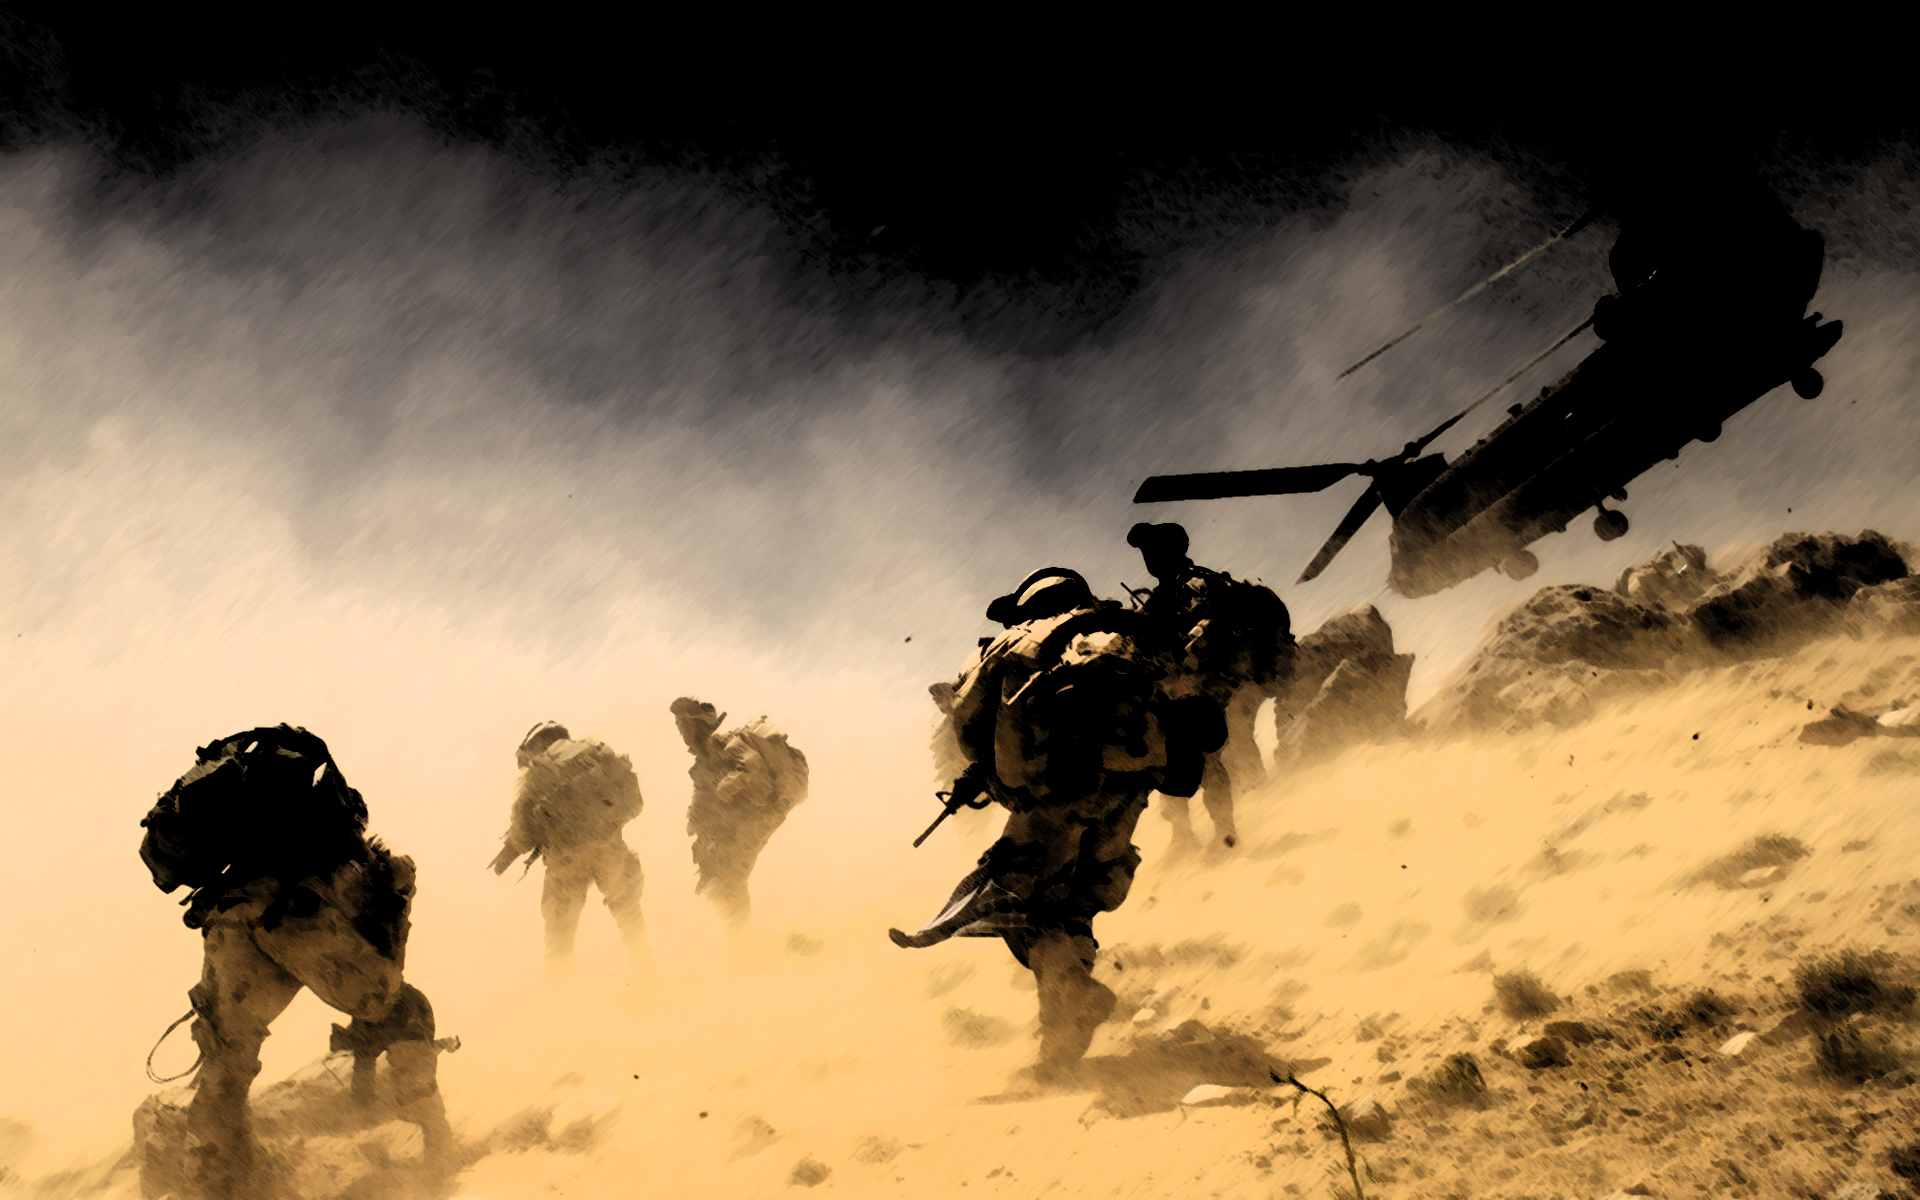 Army Wallpaper For Desktop | Wallpapers, Backgrounds, Images, Art ...